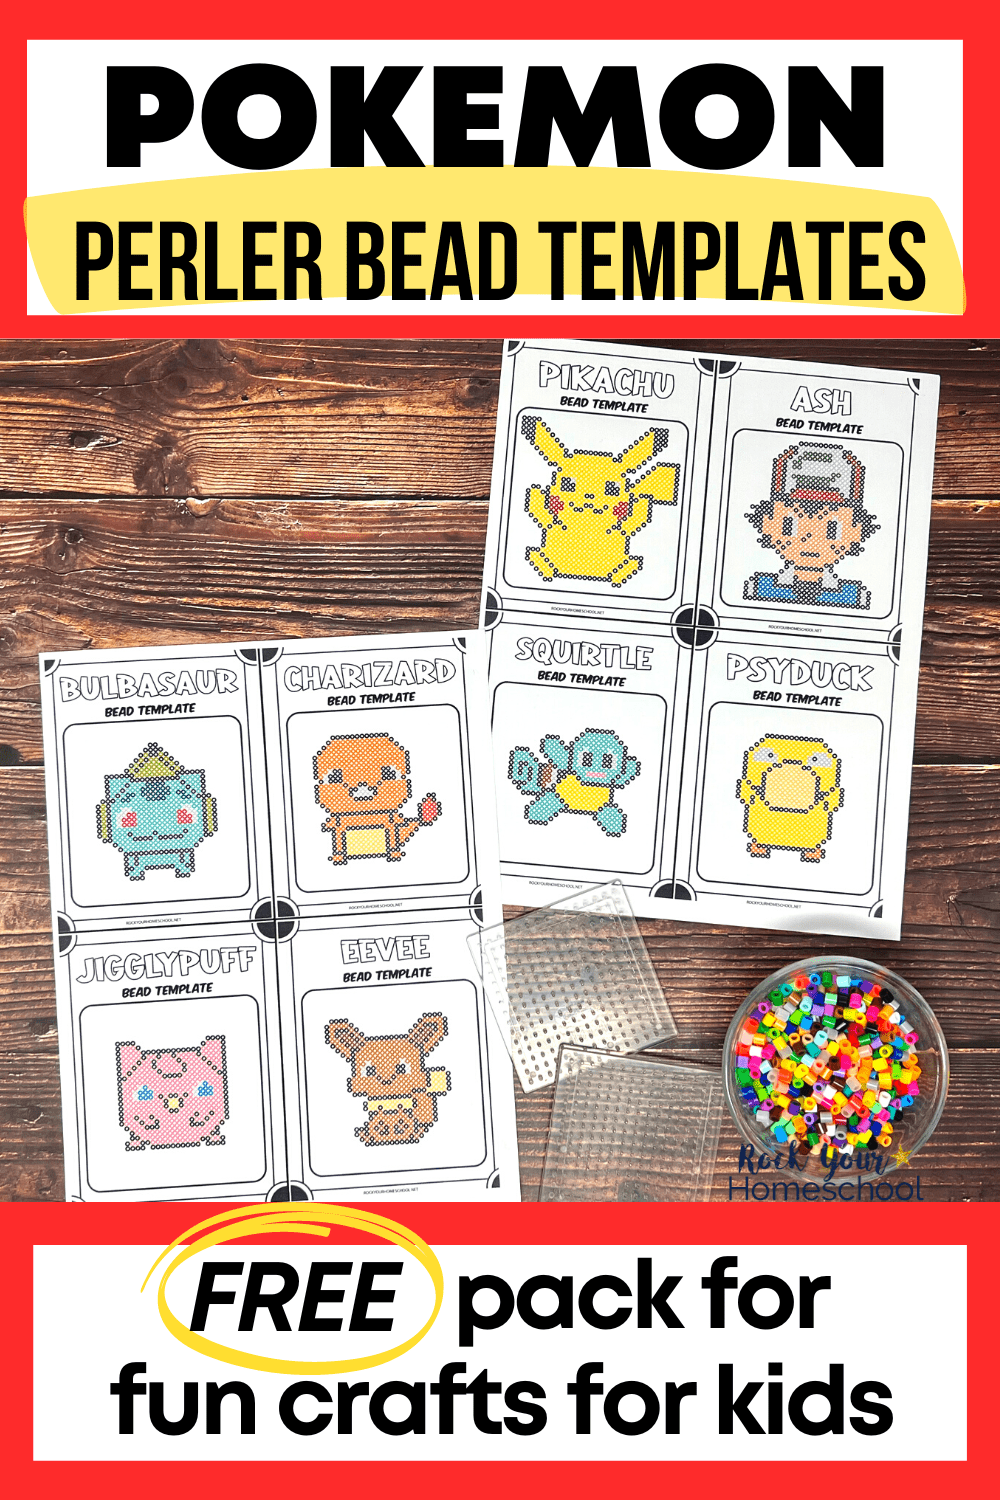 Pokemon Perler Bead Patterns: How to Make These Crafts (8 Free)